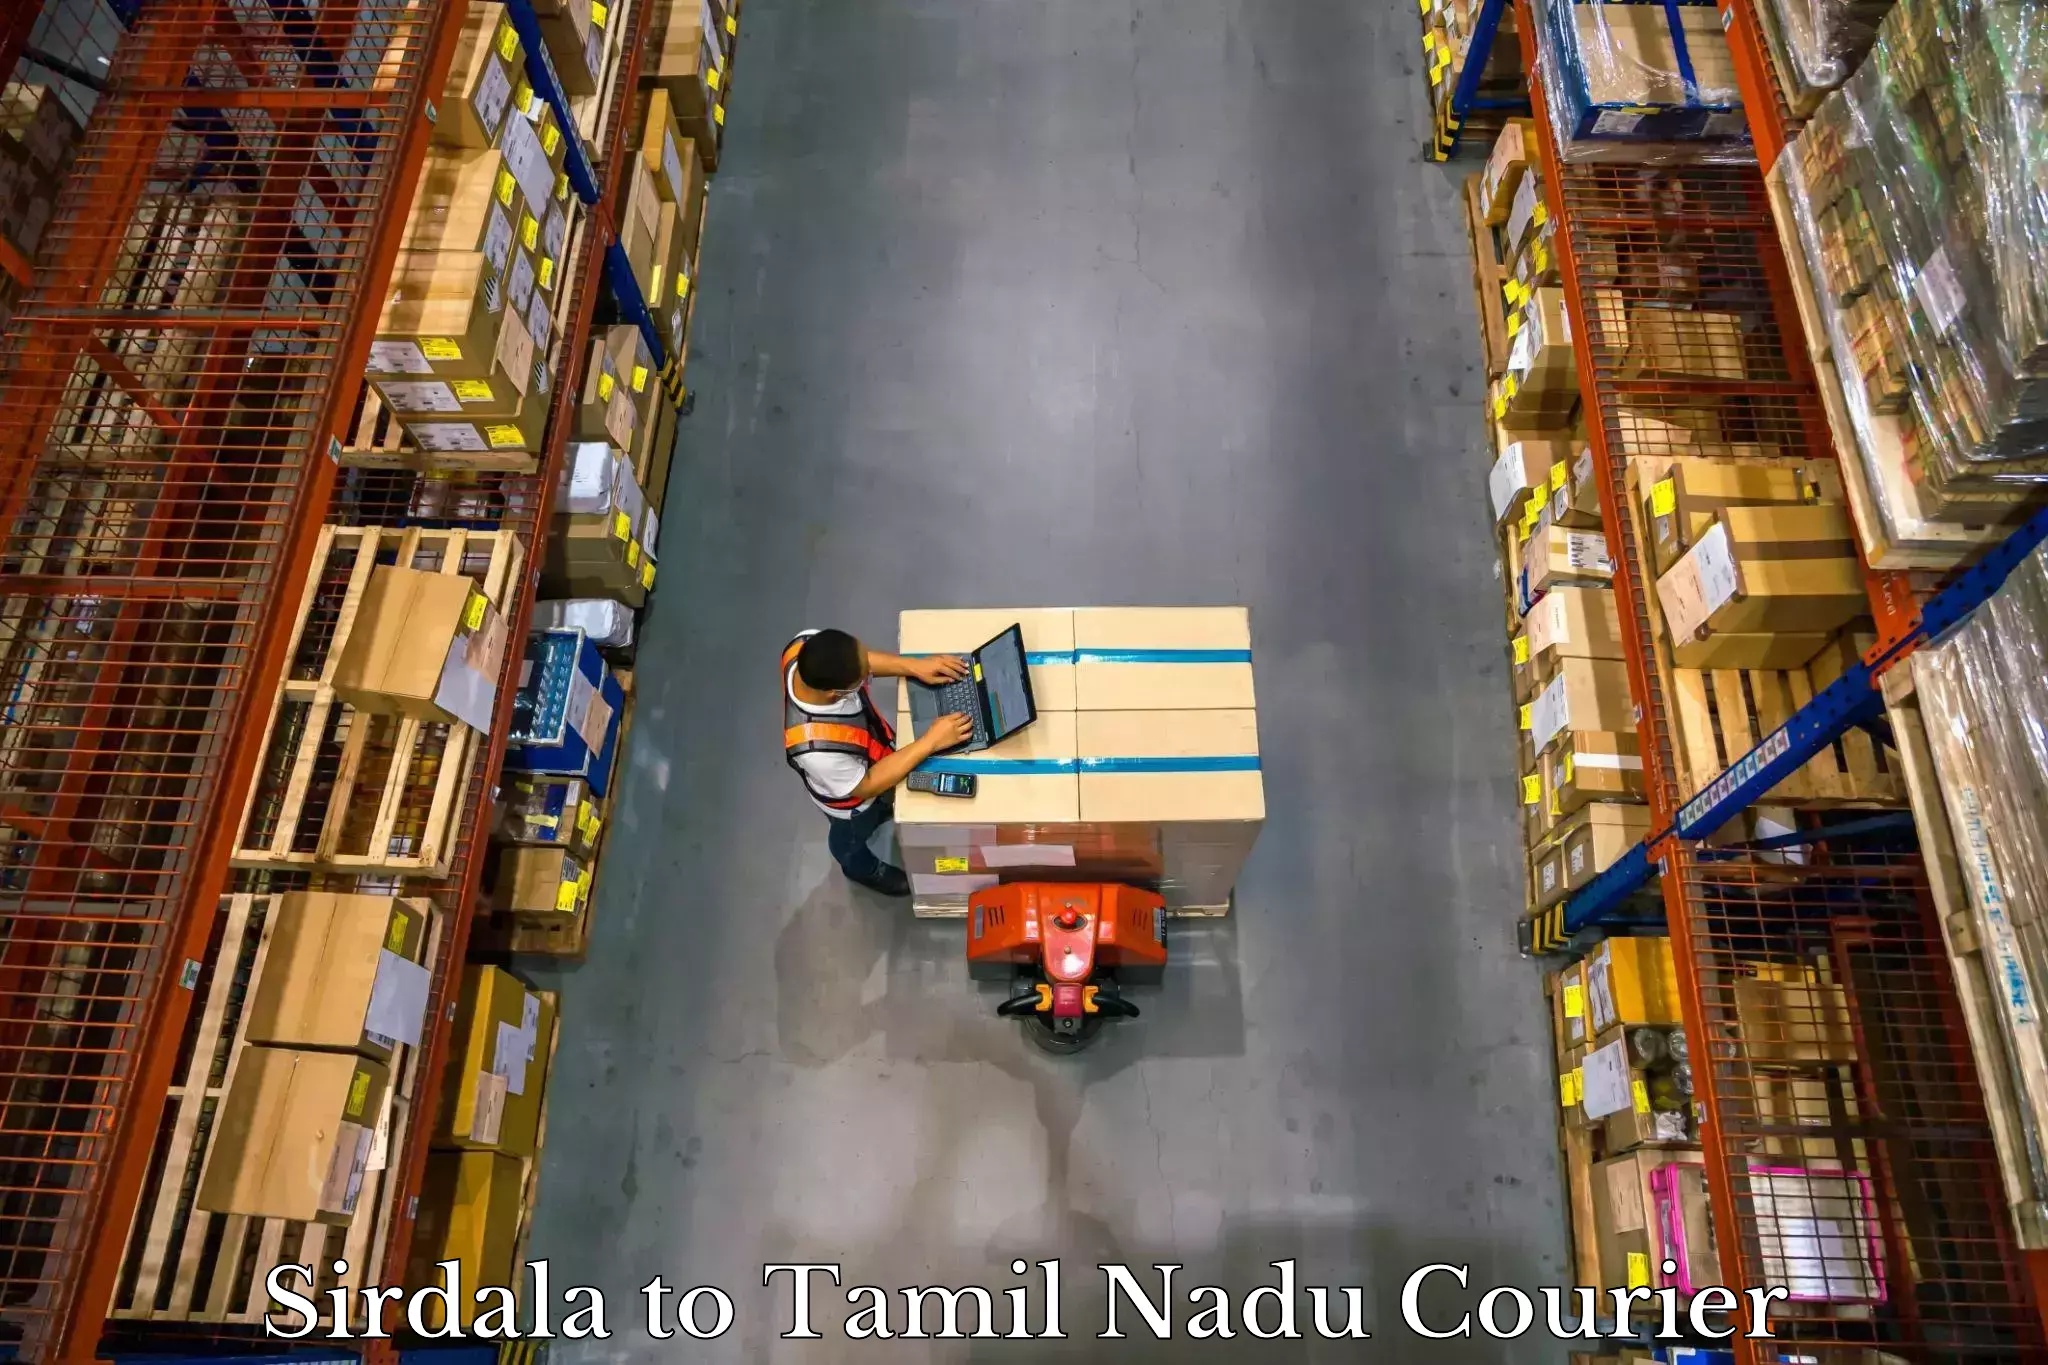 Luggage shipment specialists Sirdala to The Gandhigram Rural Institute